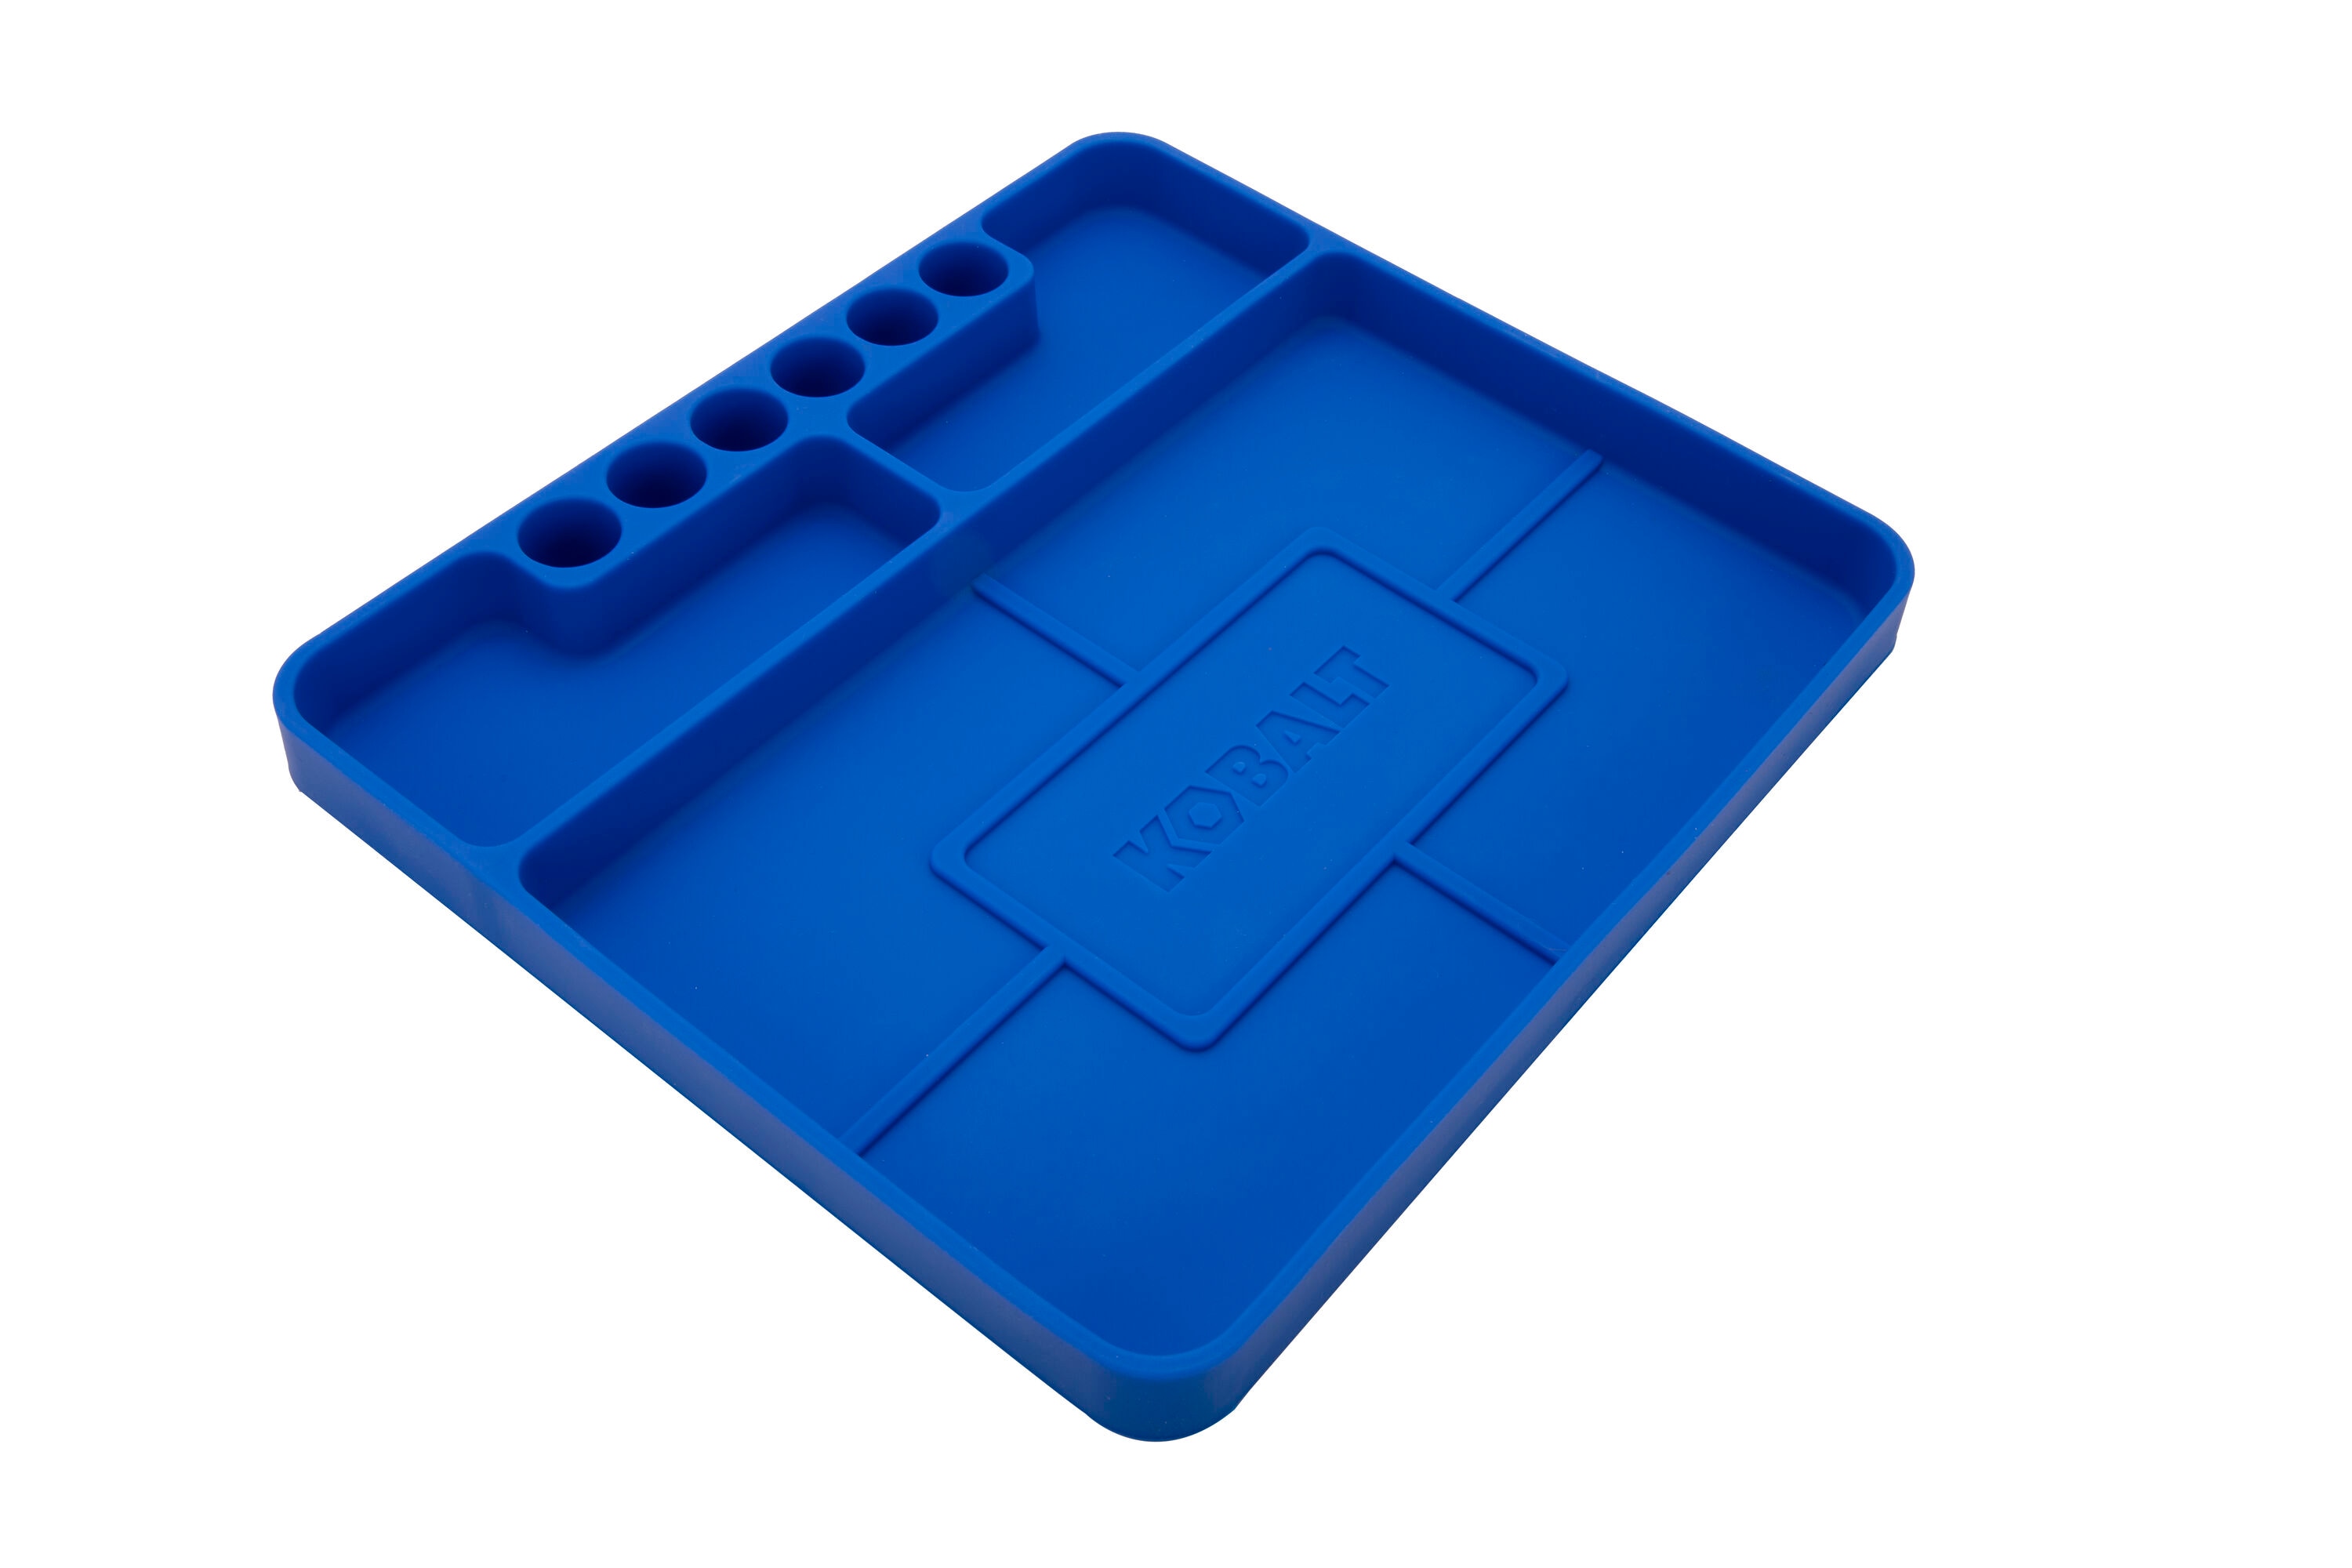 S&B Silicone Tool Tray - Small - Charcoal - 80-1004S